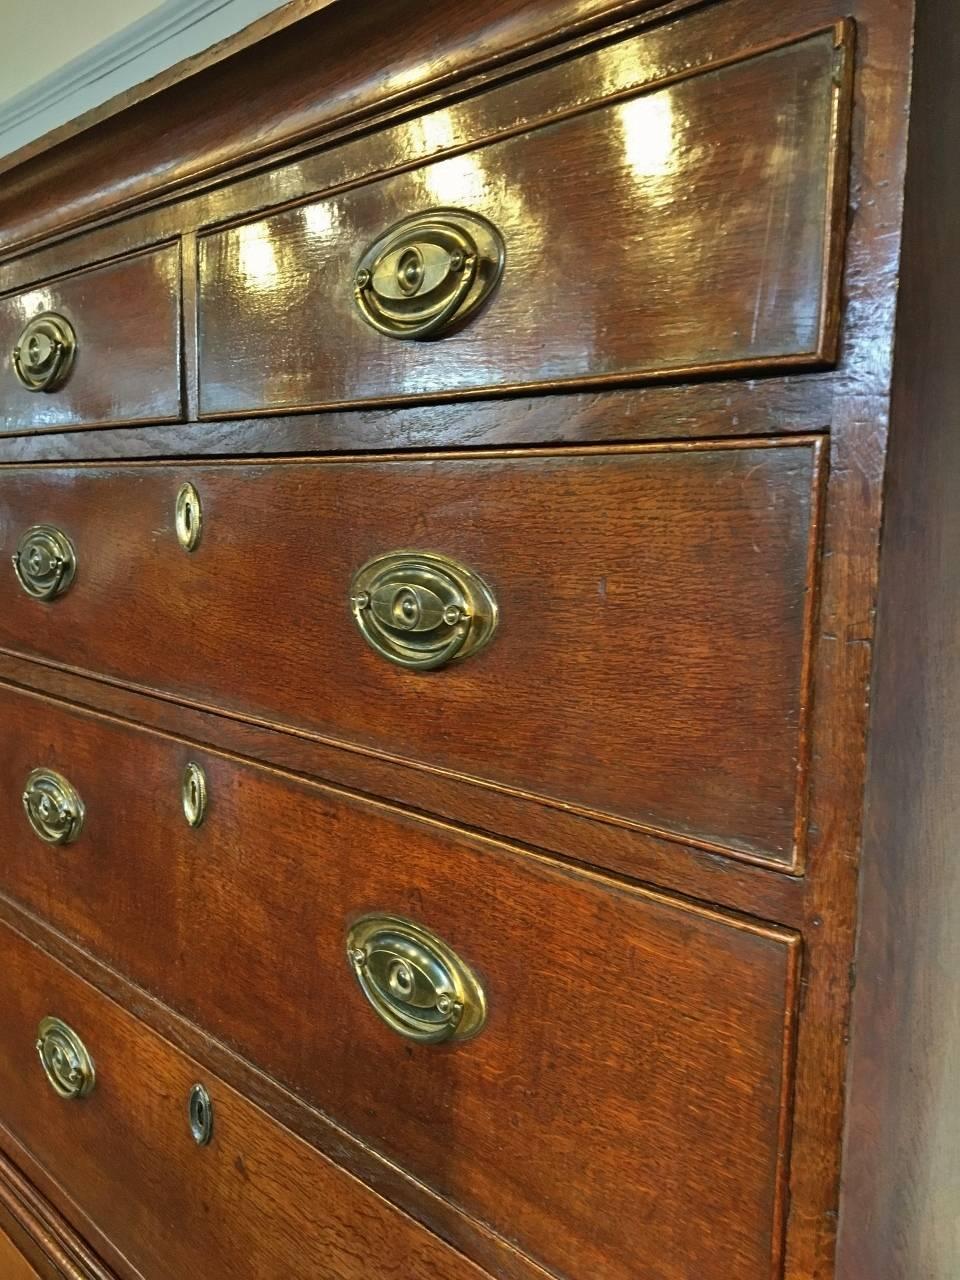 An attractive and compact antique oak chest on chest, English and dated about 1790. An ideal  piece where headroom is an issue.!
A delightful chest which has been well maintained and is seen here in excellent condition, having a mellow oak color